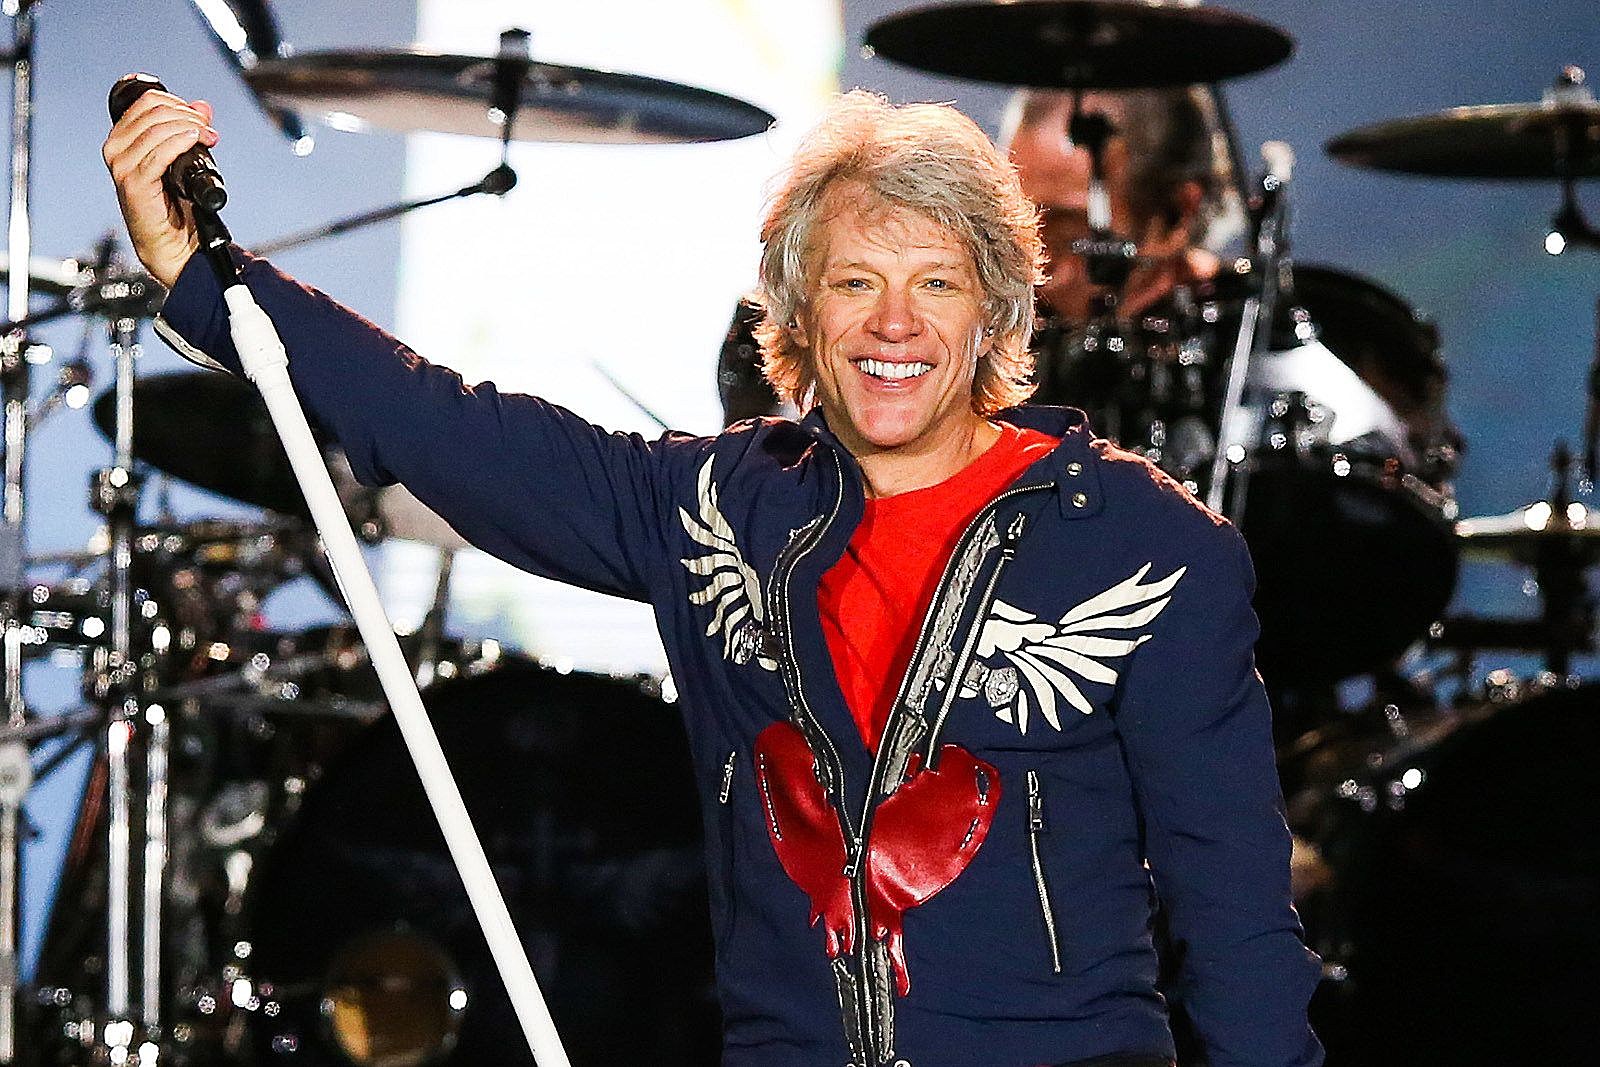 Jon Bon Jovi Wasn’t Expecting His Recovery to Take This Long